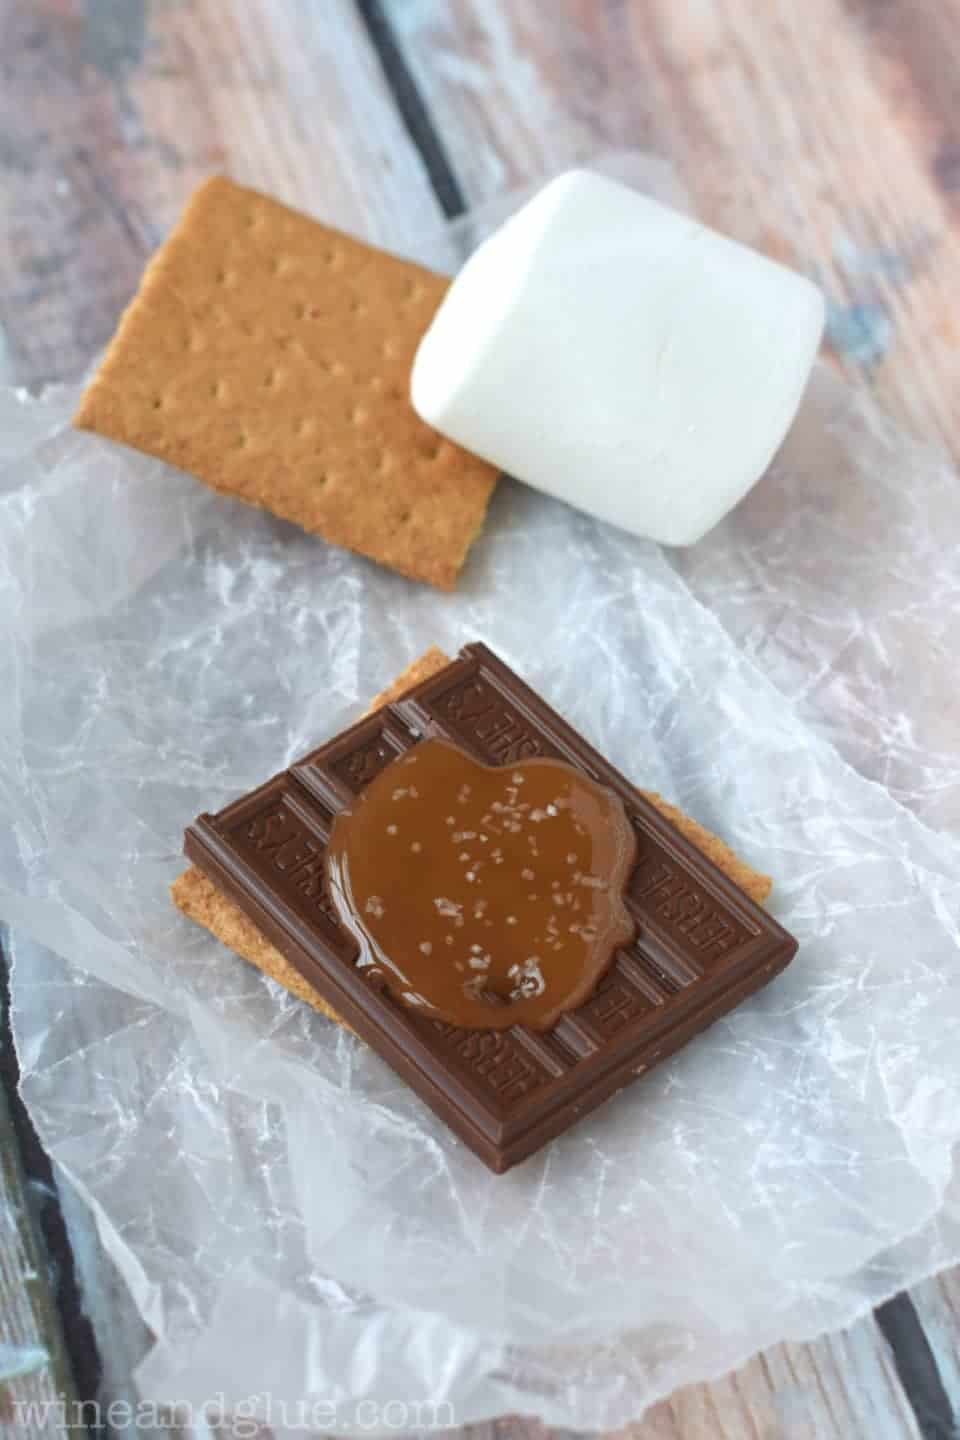 Salted Caramel S'mores | The amazingness of s'mores with the added bonus of salted caramel, so irresistible!